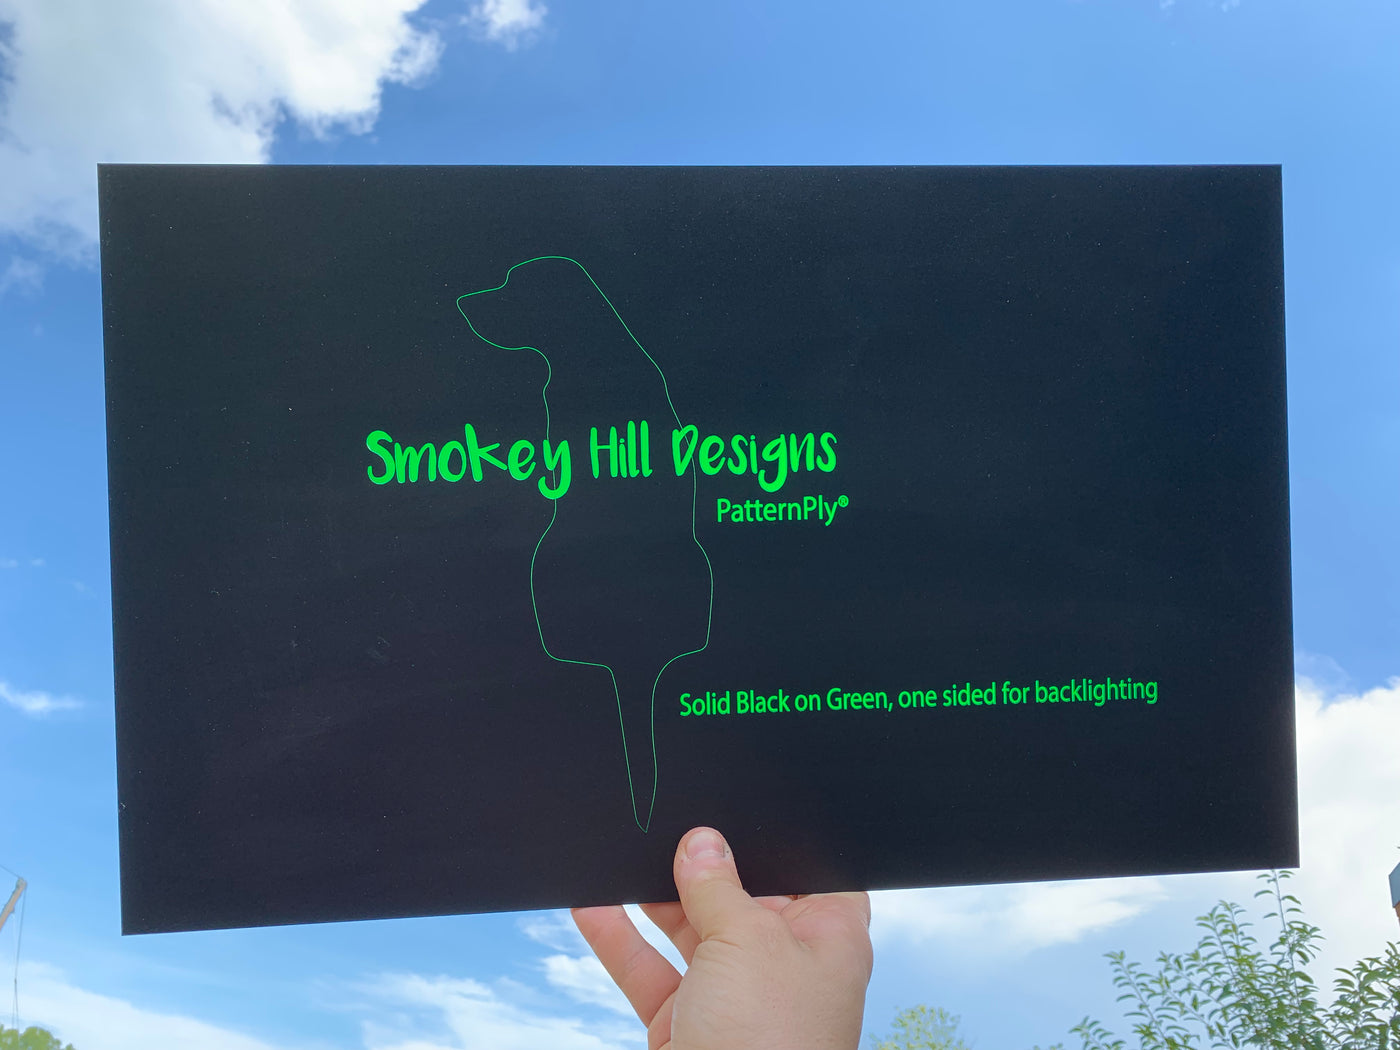 PatternPly® Acrylic Solid Black on Green, one sided for backlighting